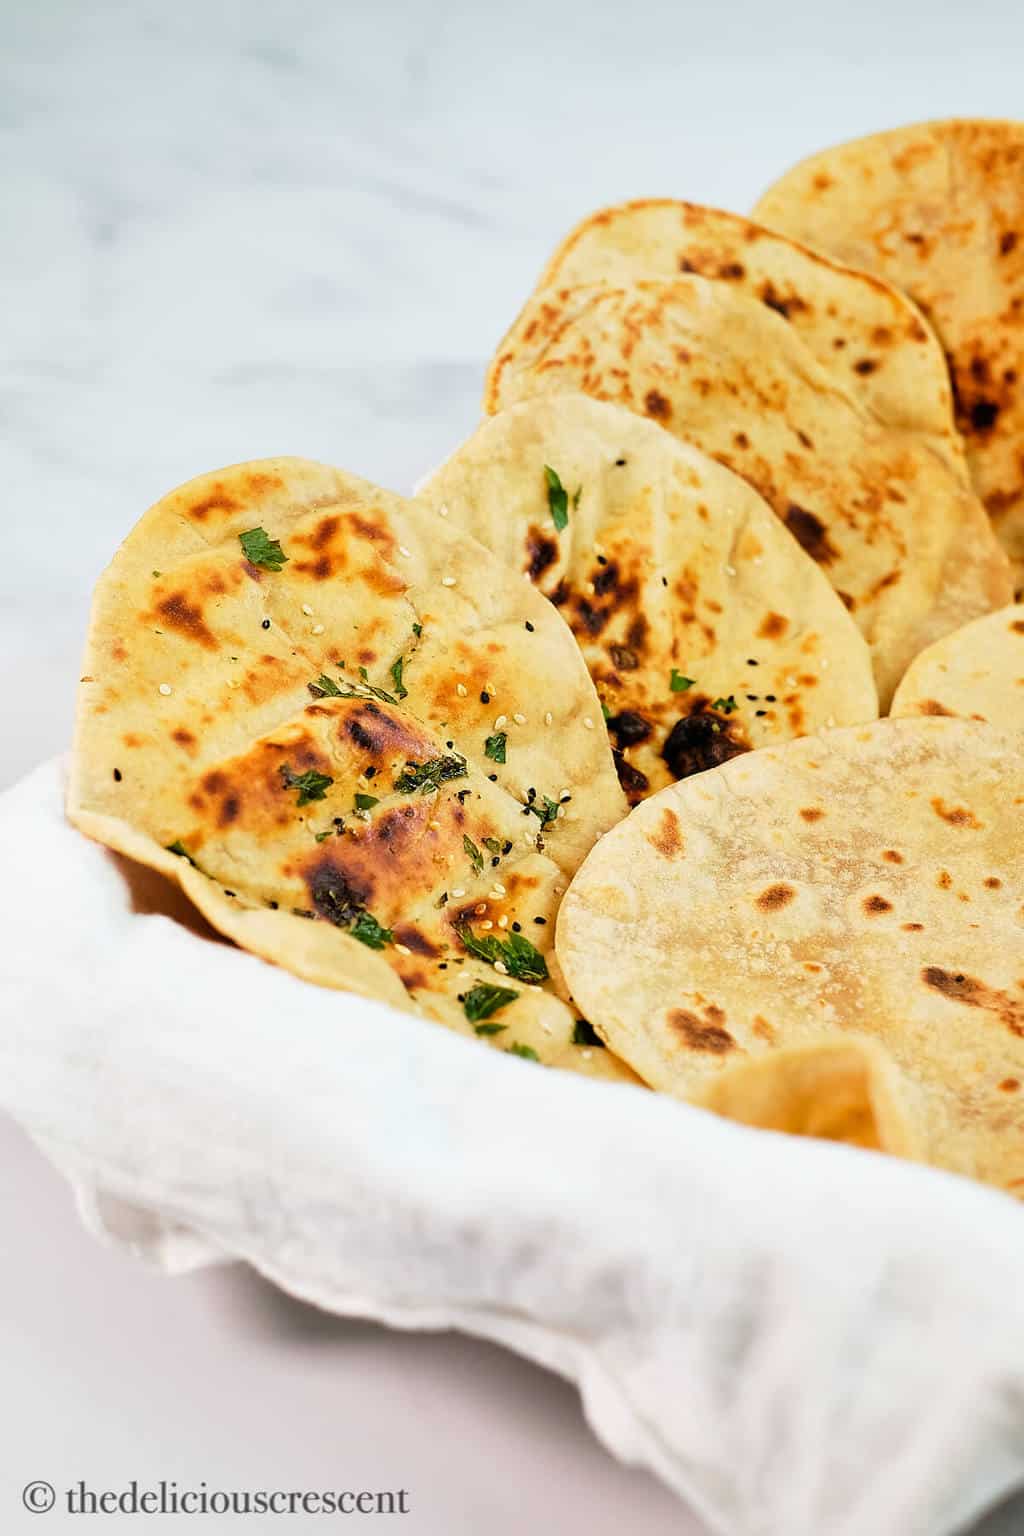 Side view of naan and other breads made in a skillet.